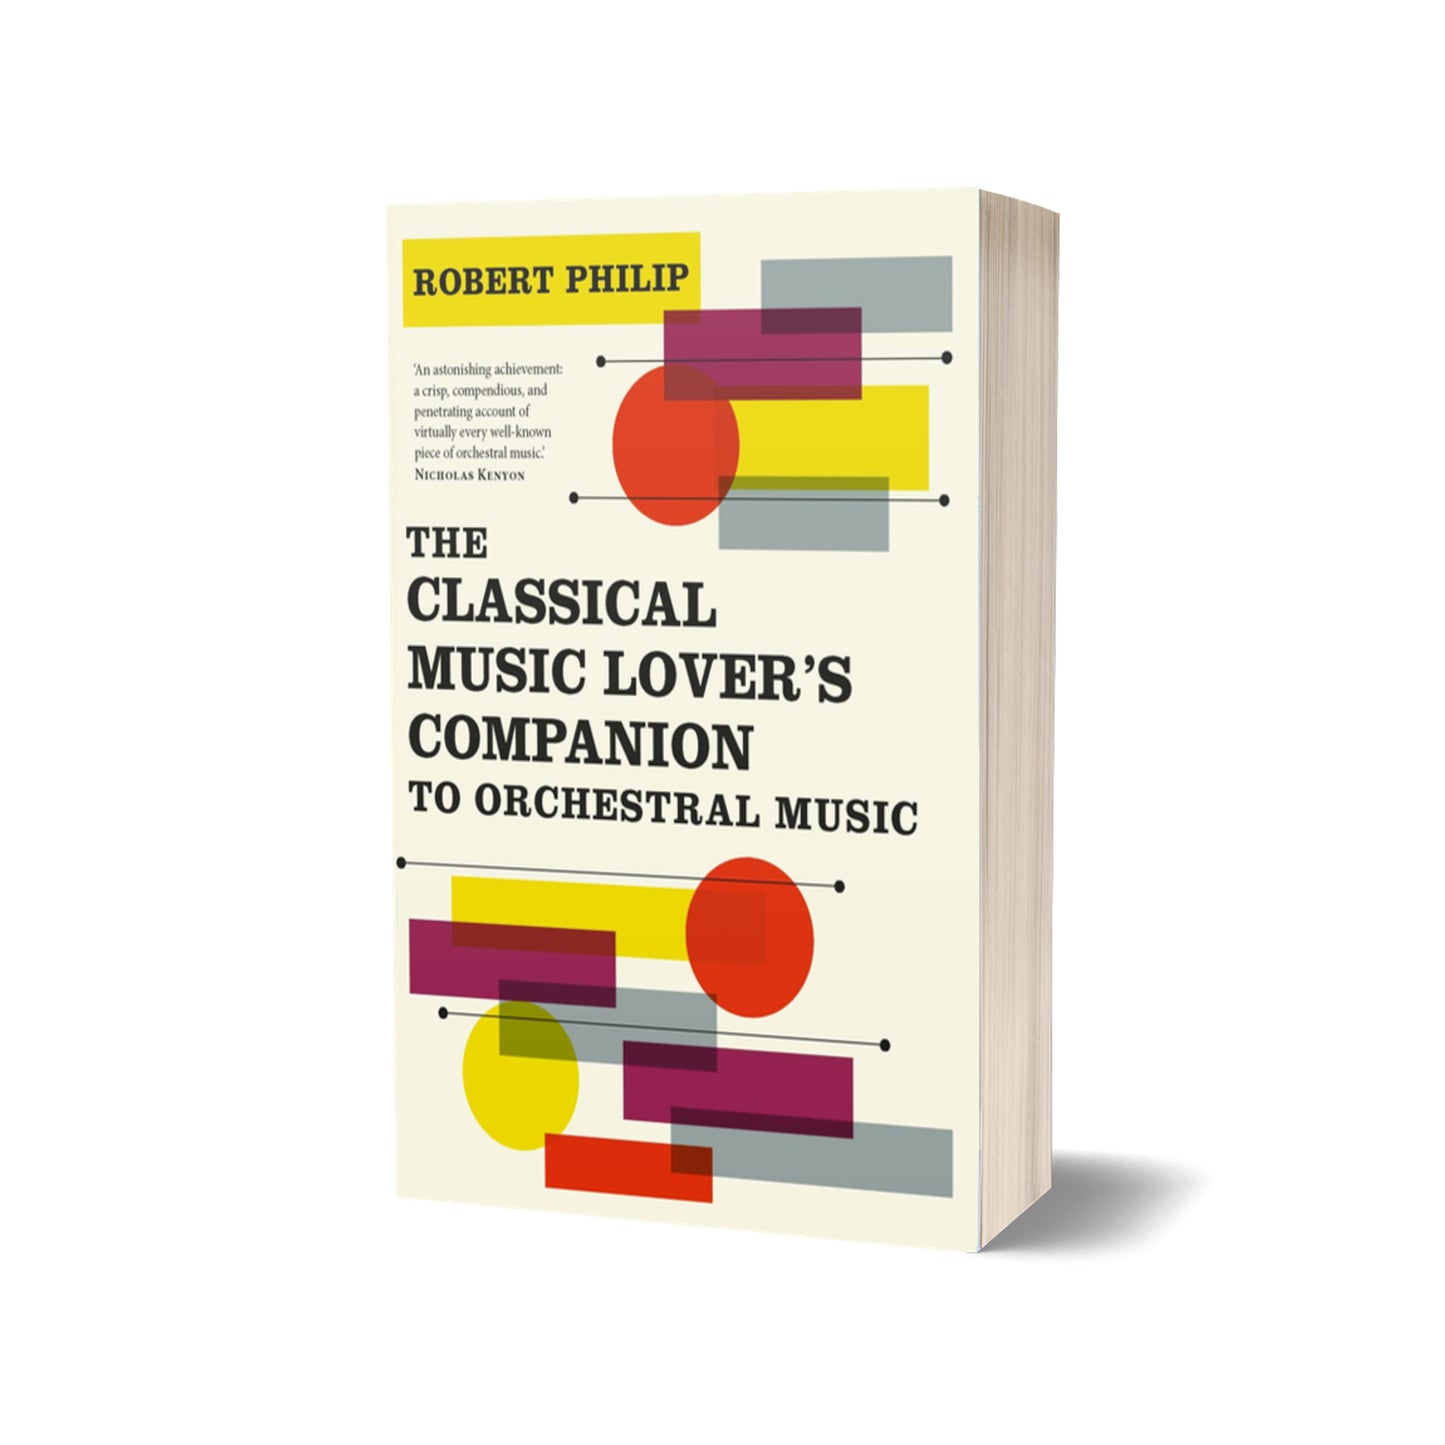 The Classical Music Lover’s Companion to Orchestral Music